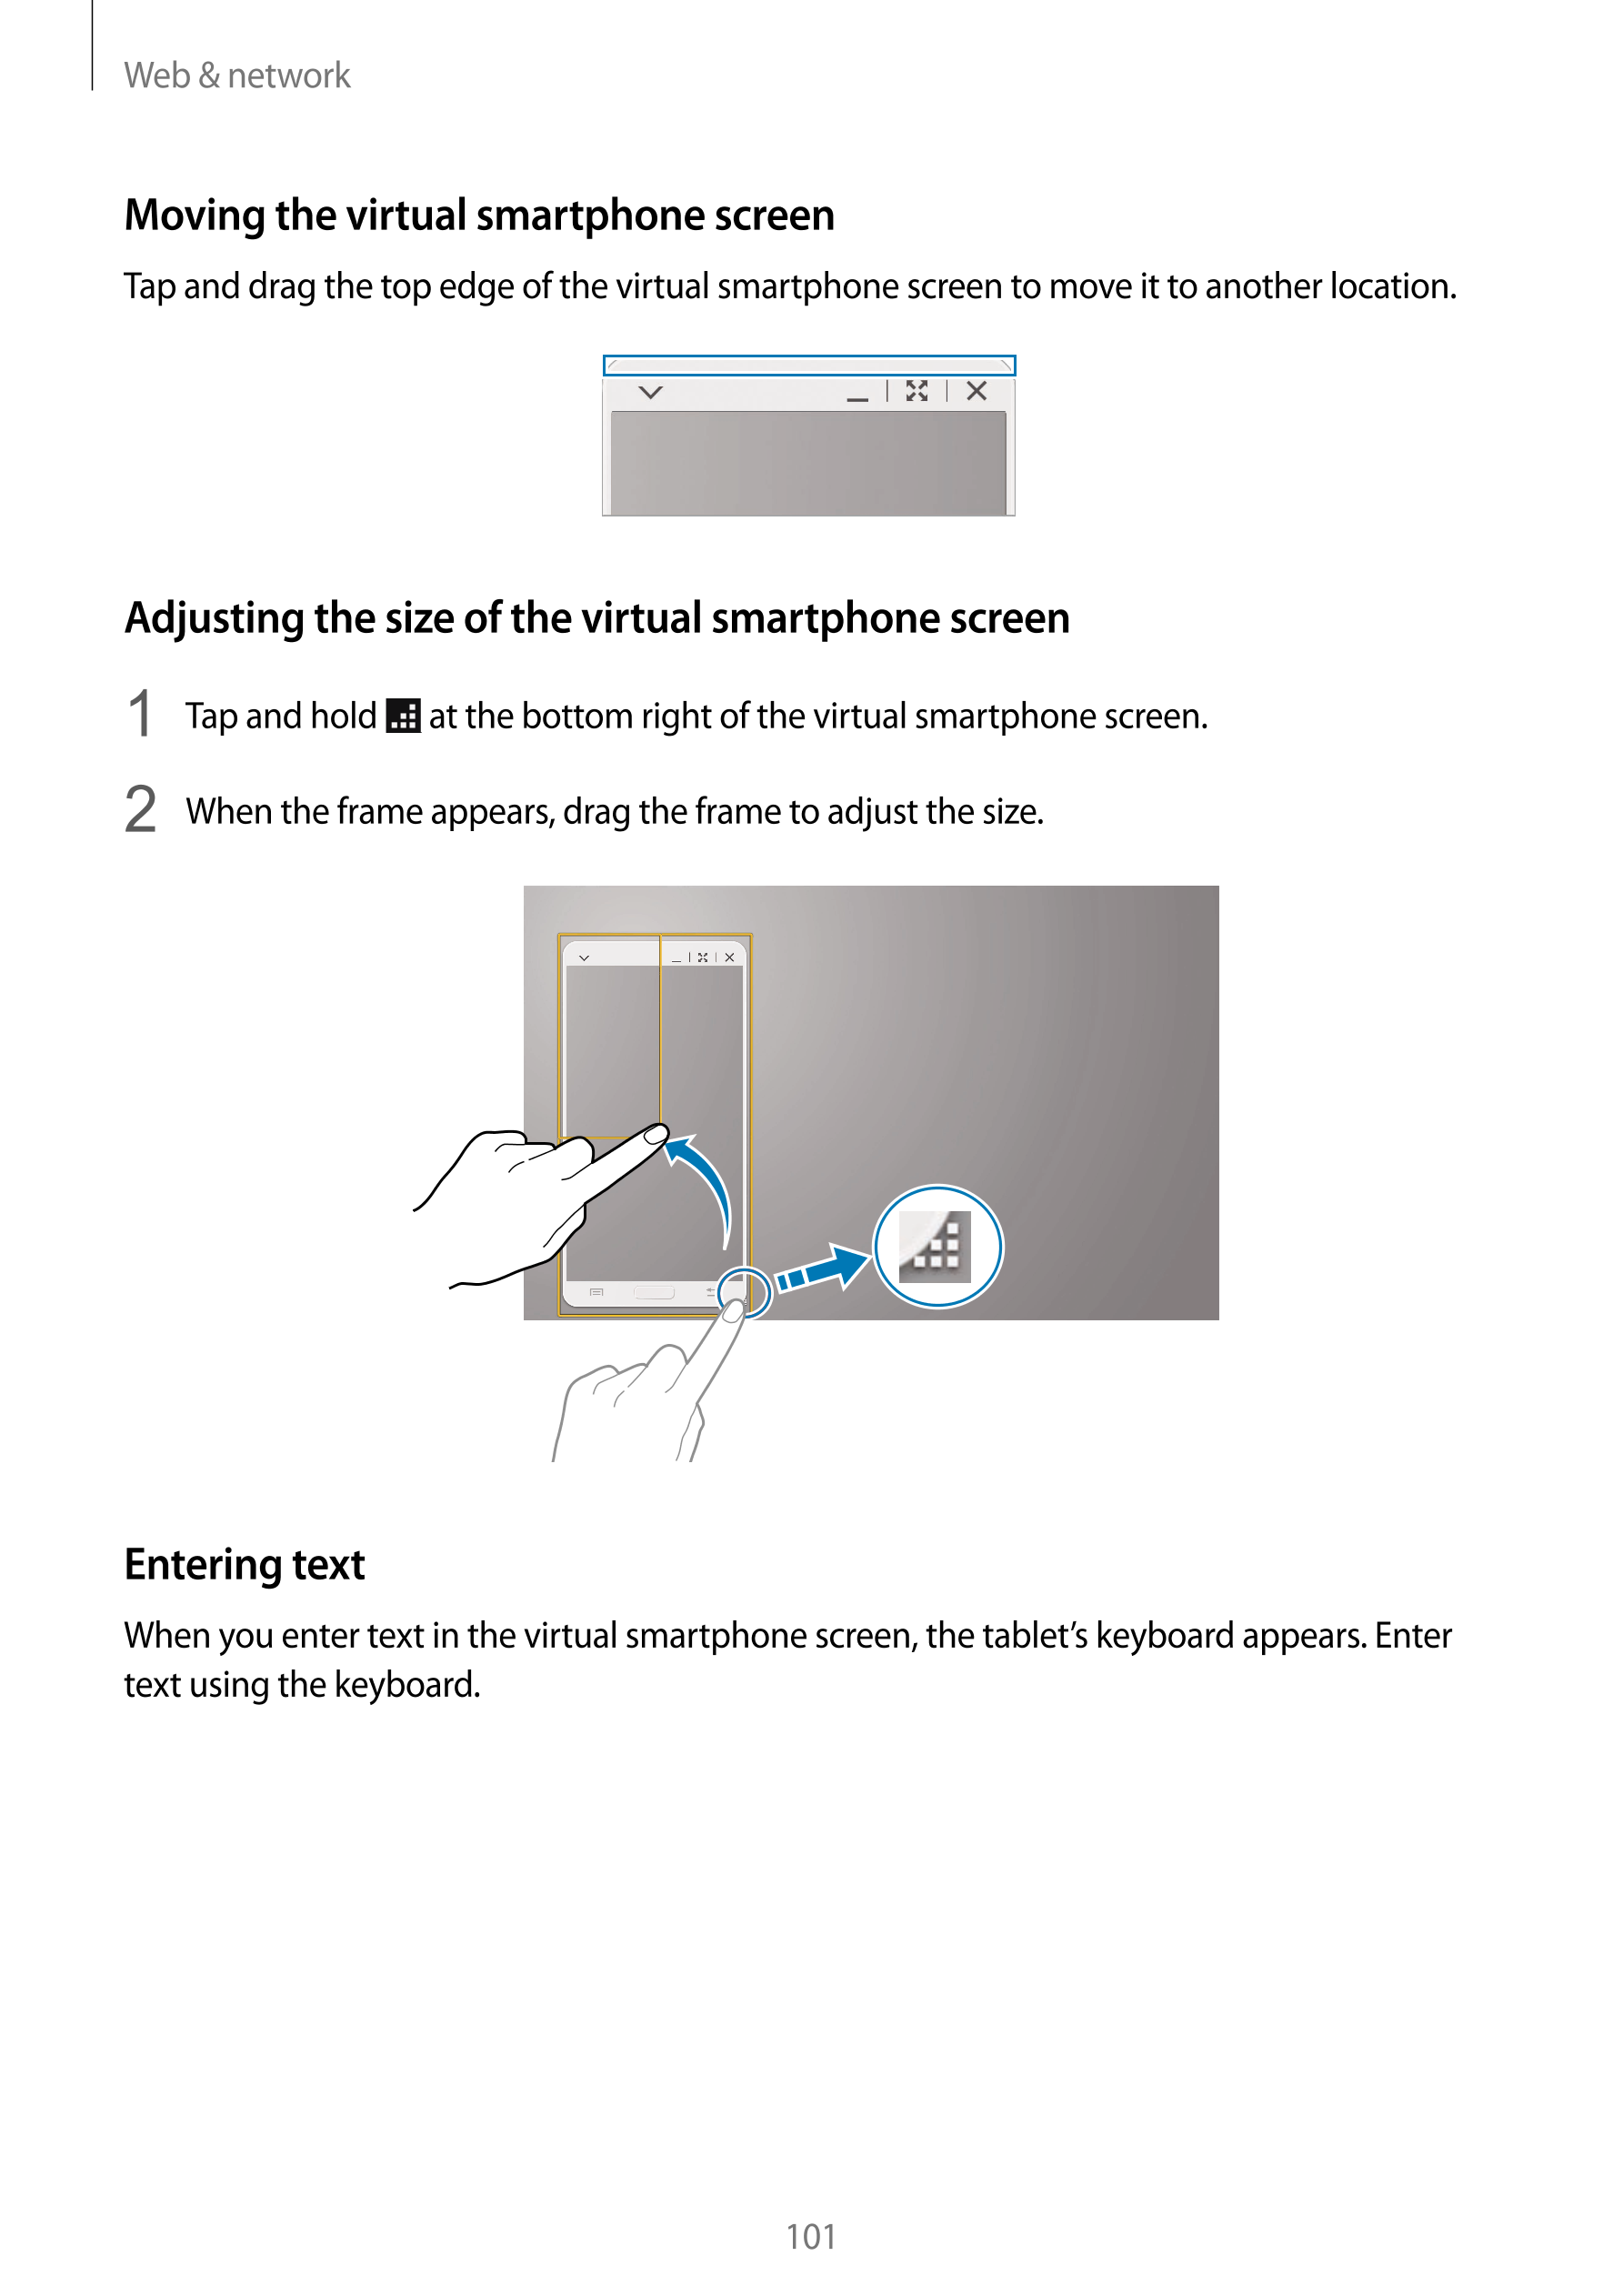 Web & network
Moving the virtual smartphone screen
Tap and drag the top edge of the virtual smartphone screen to move it to anot